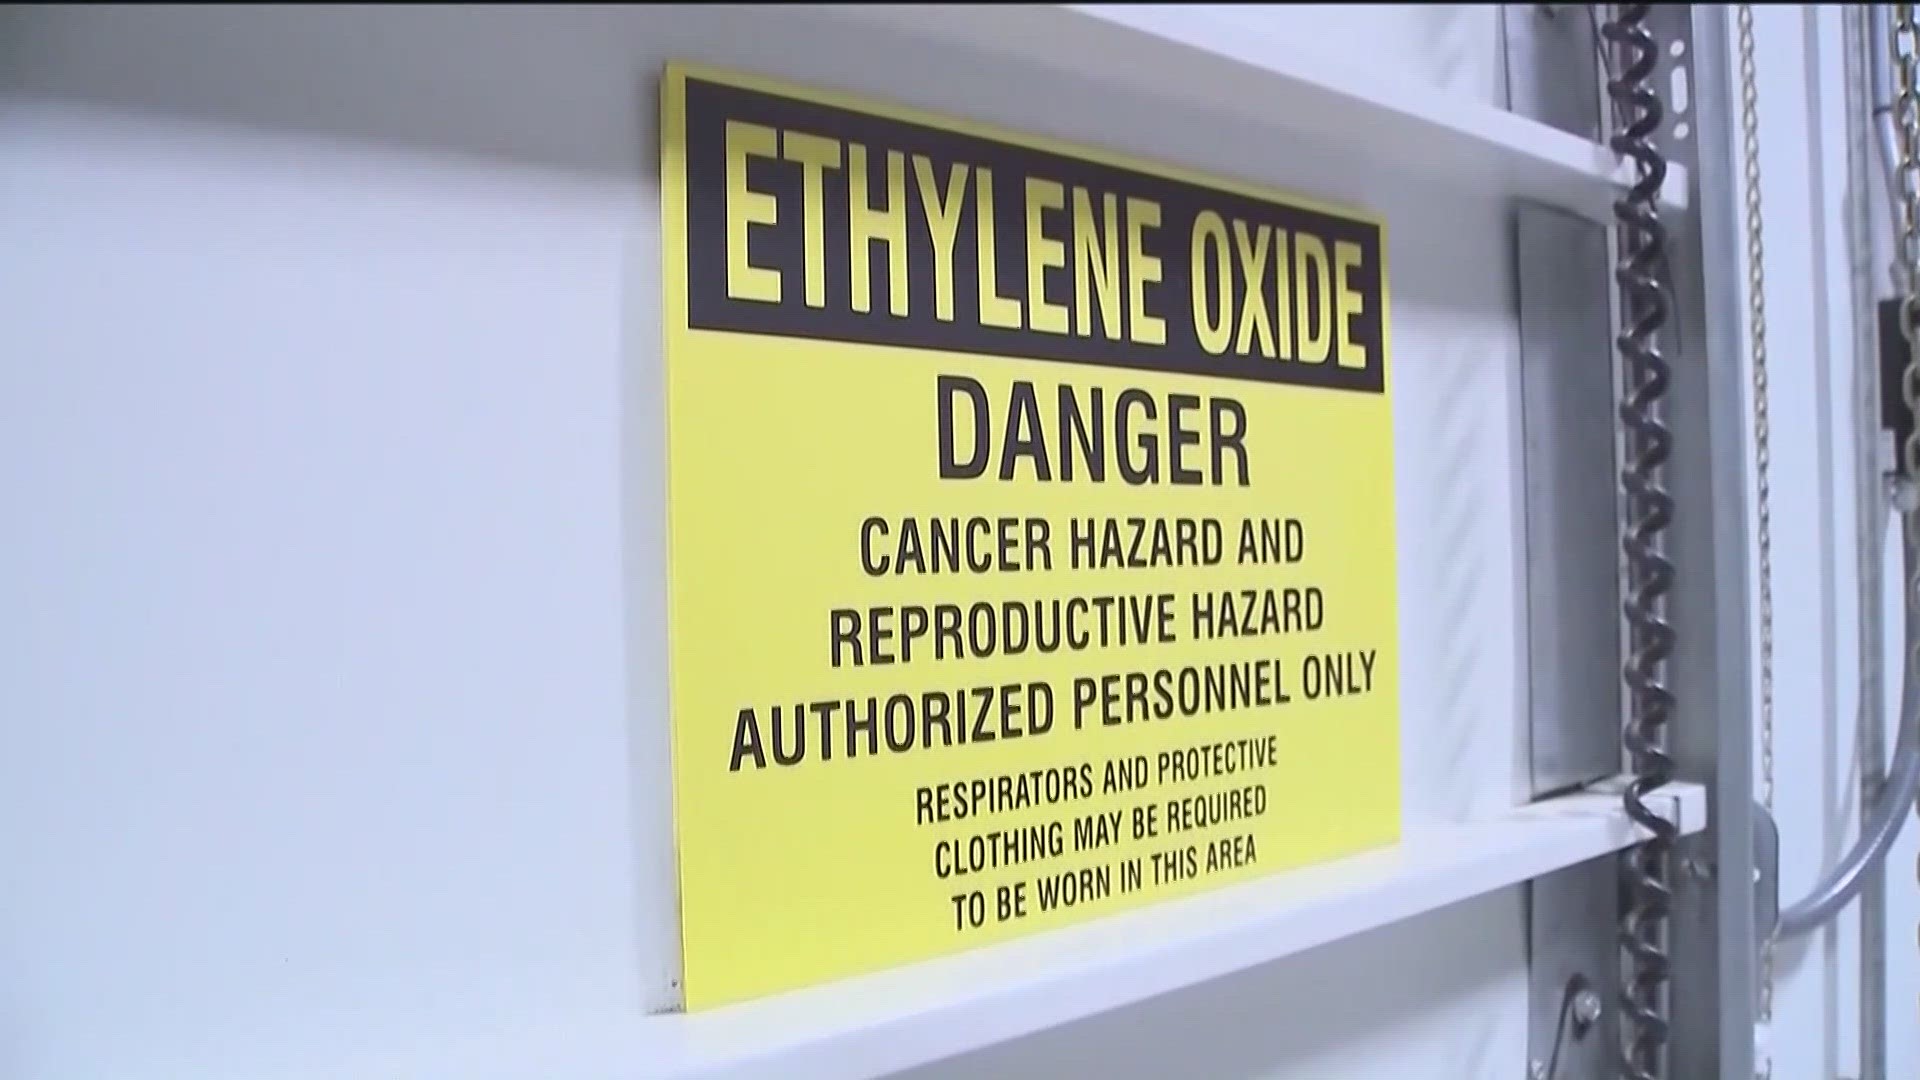 Companies in metro Atlanta would need to limit their output into the atmosphere of ethylene oxide or be in violation of federal regulations.